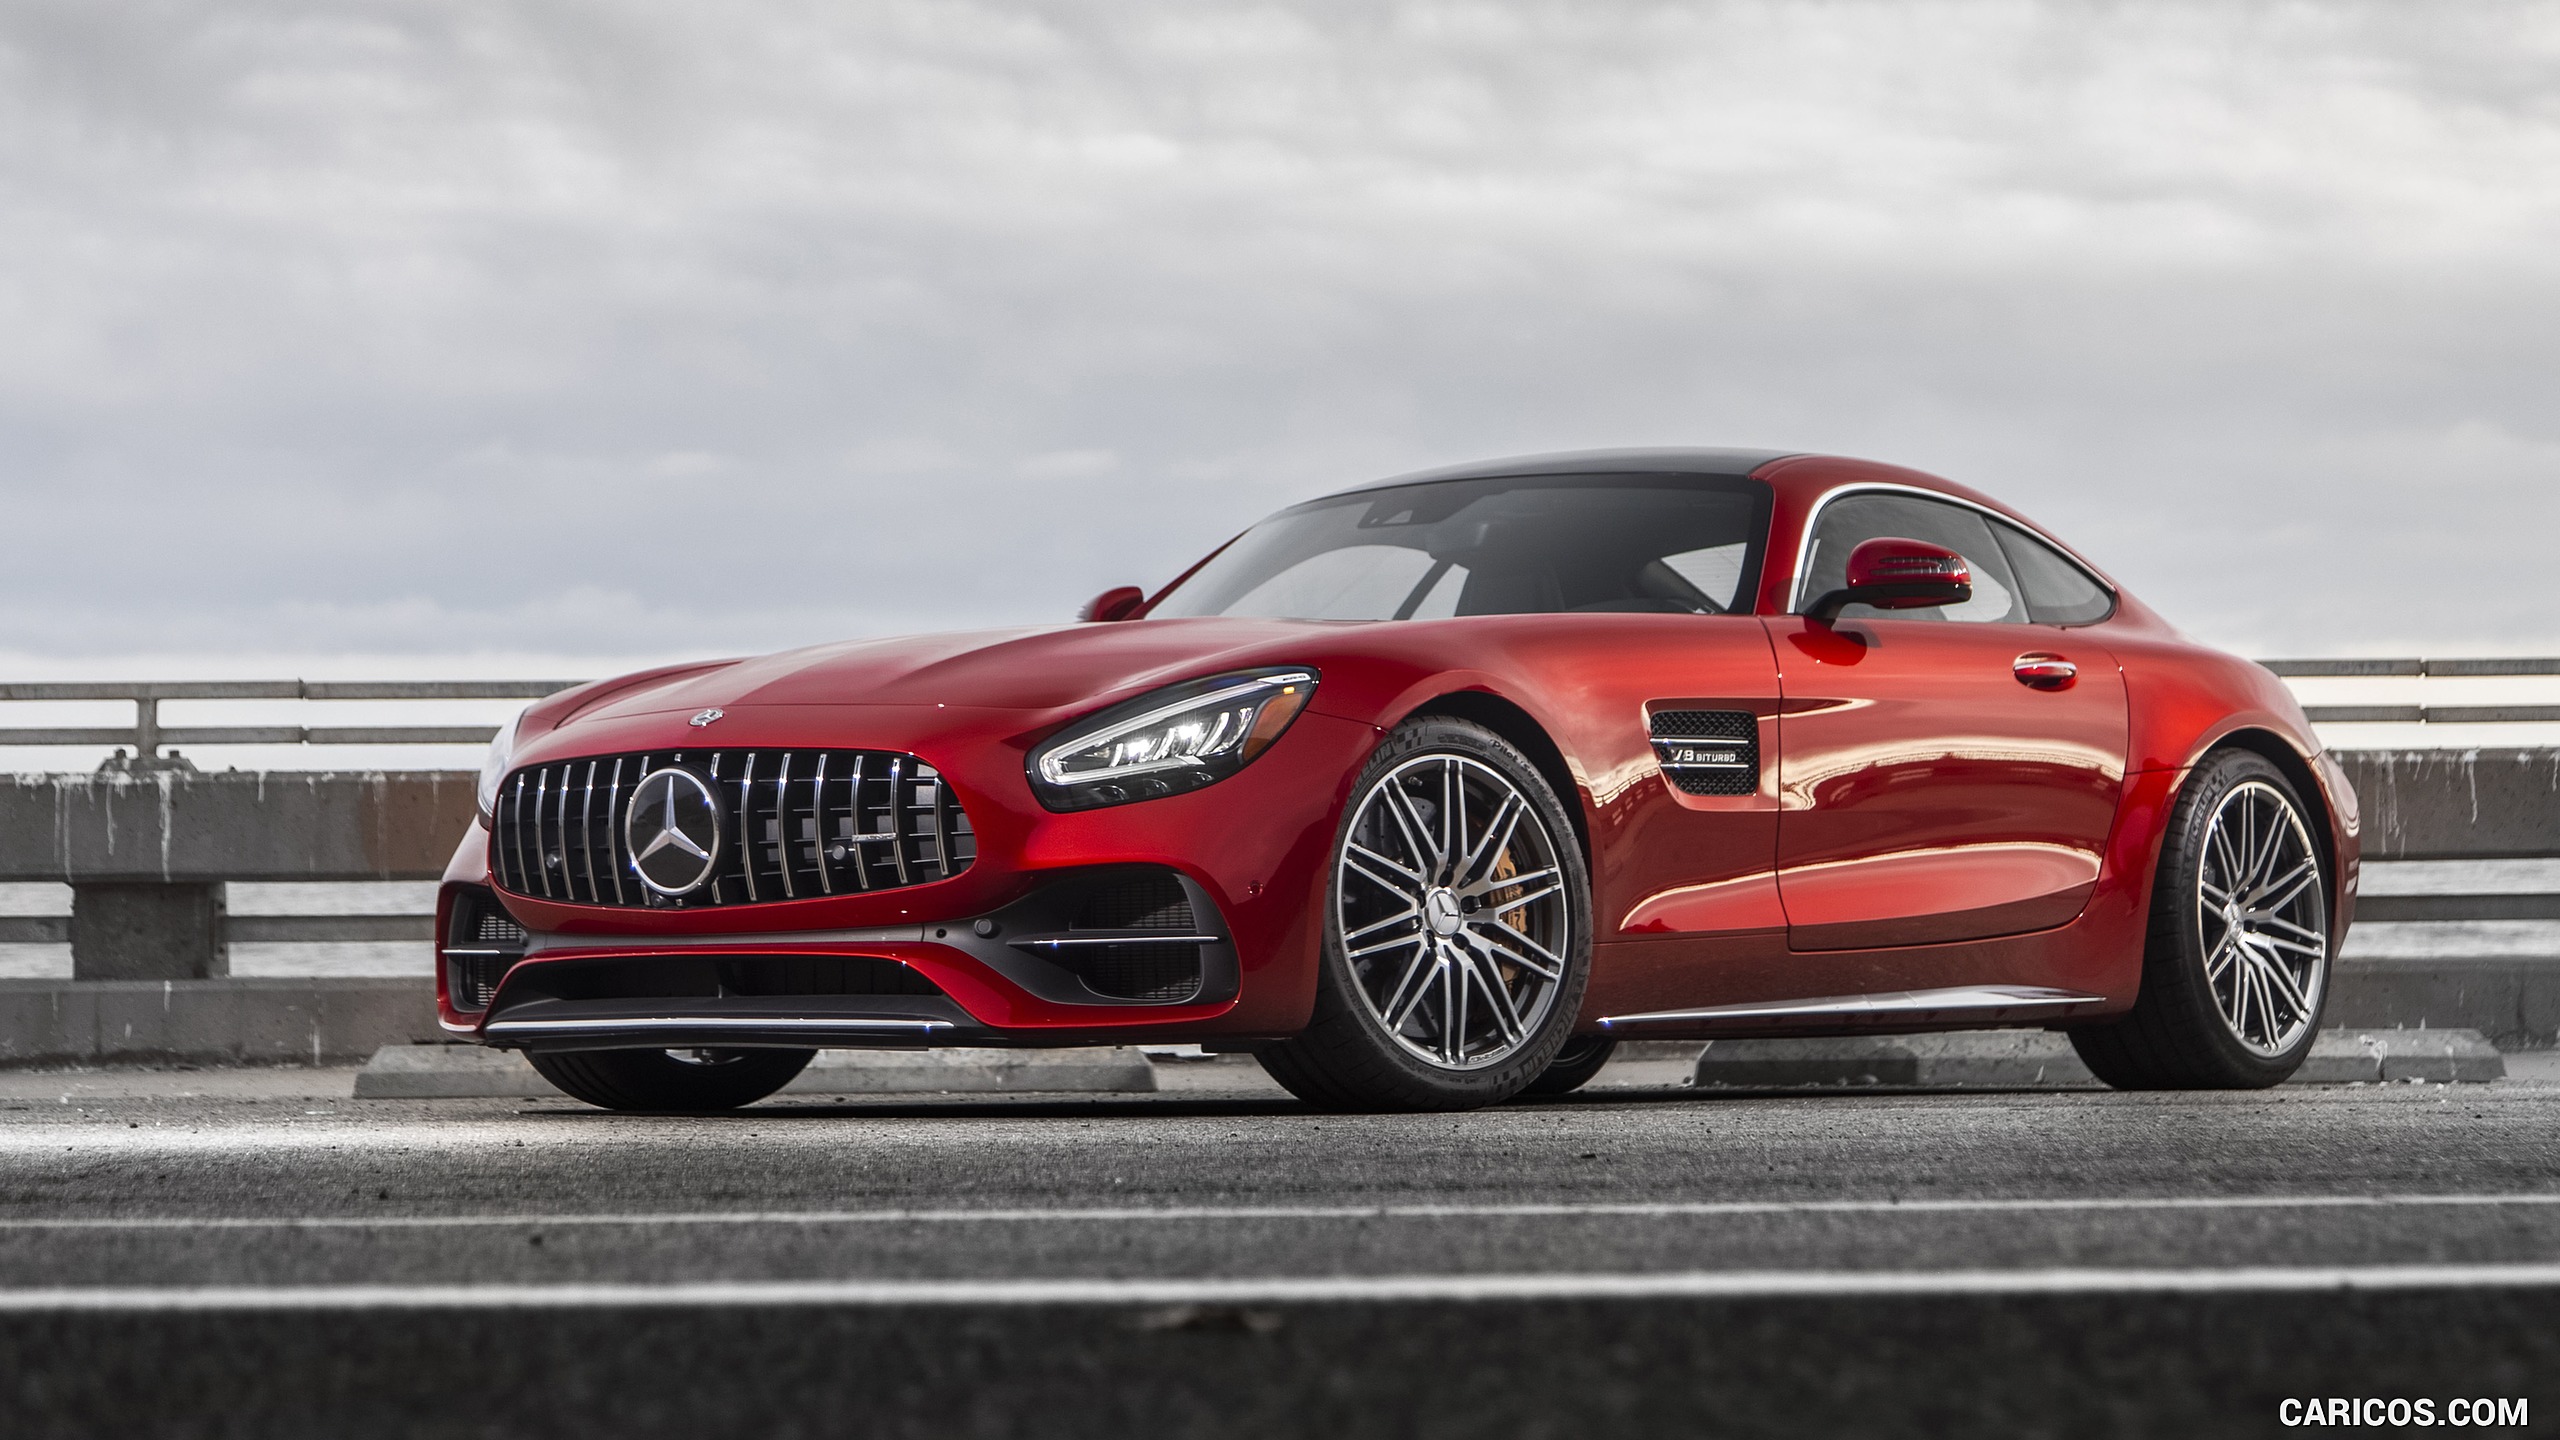 2020 Mercedes-AMG GT C Coupe (US-Spec) - Front Three-Quarter, #155 of 328